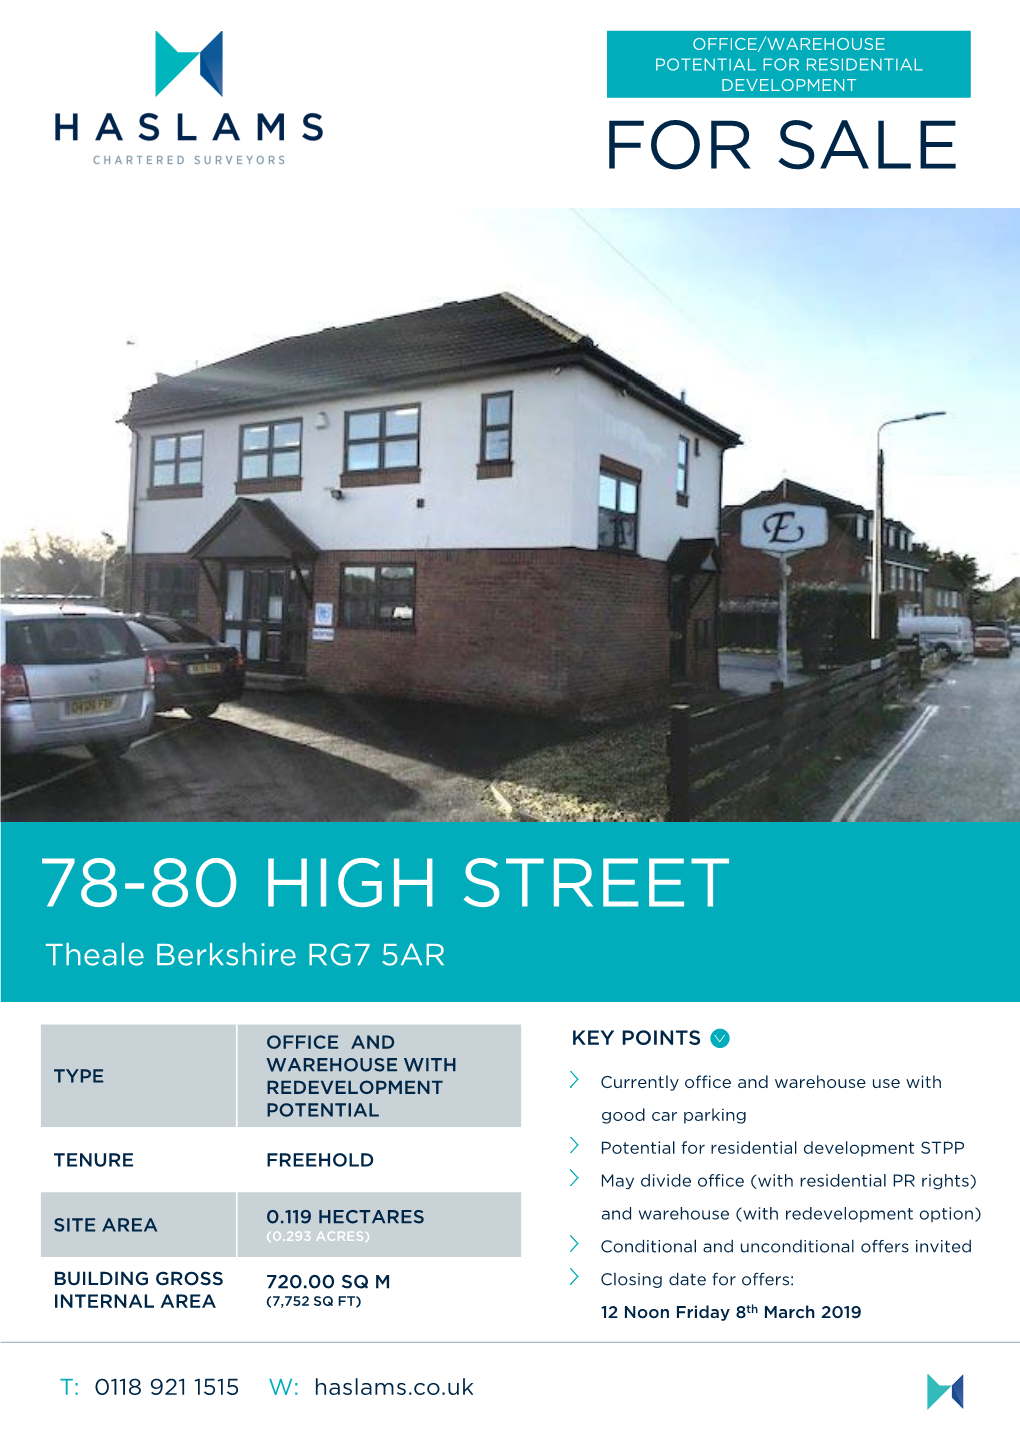 For Sale 78-80 High Street